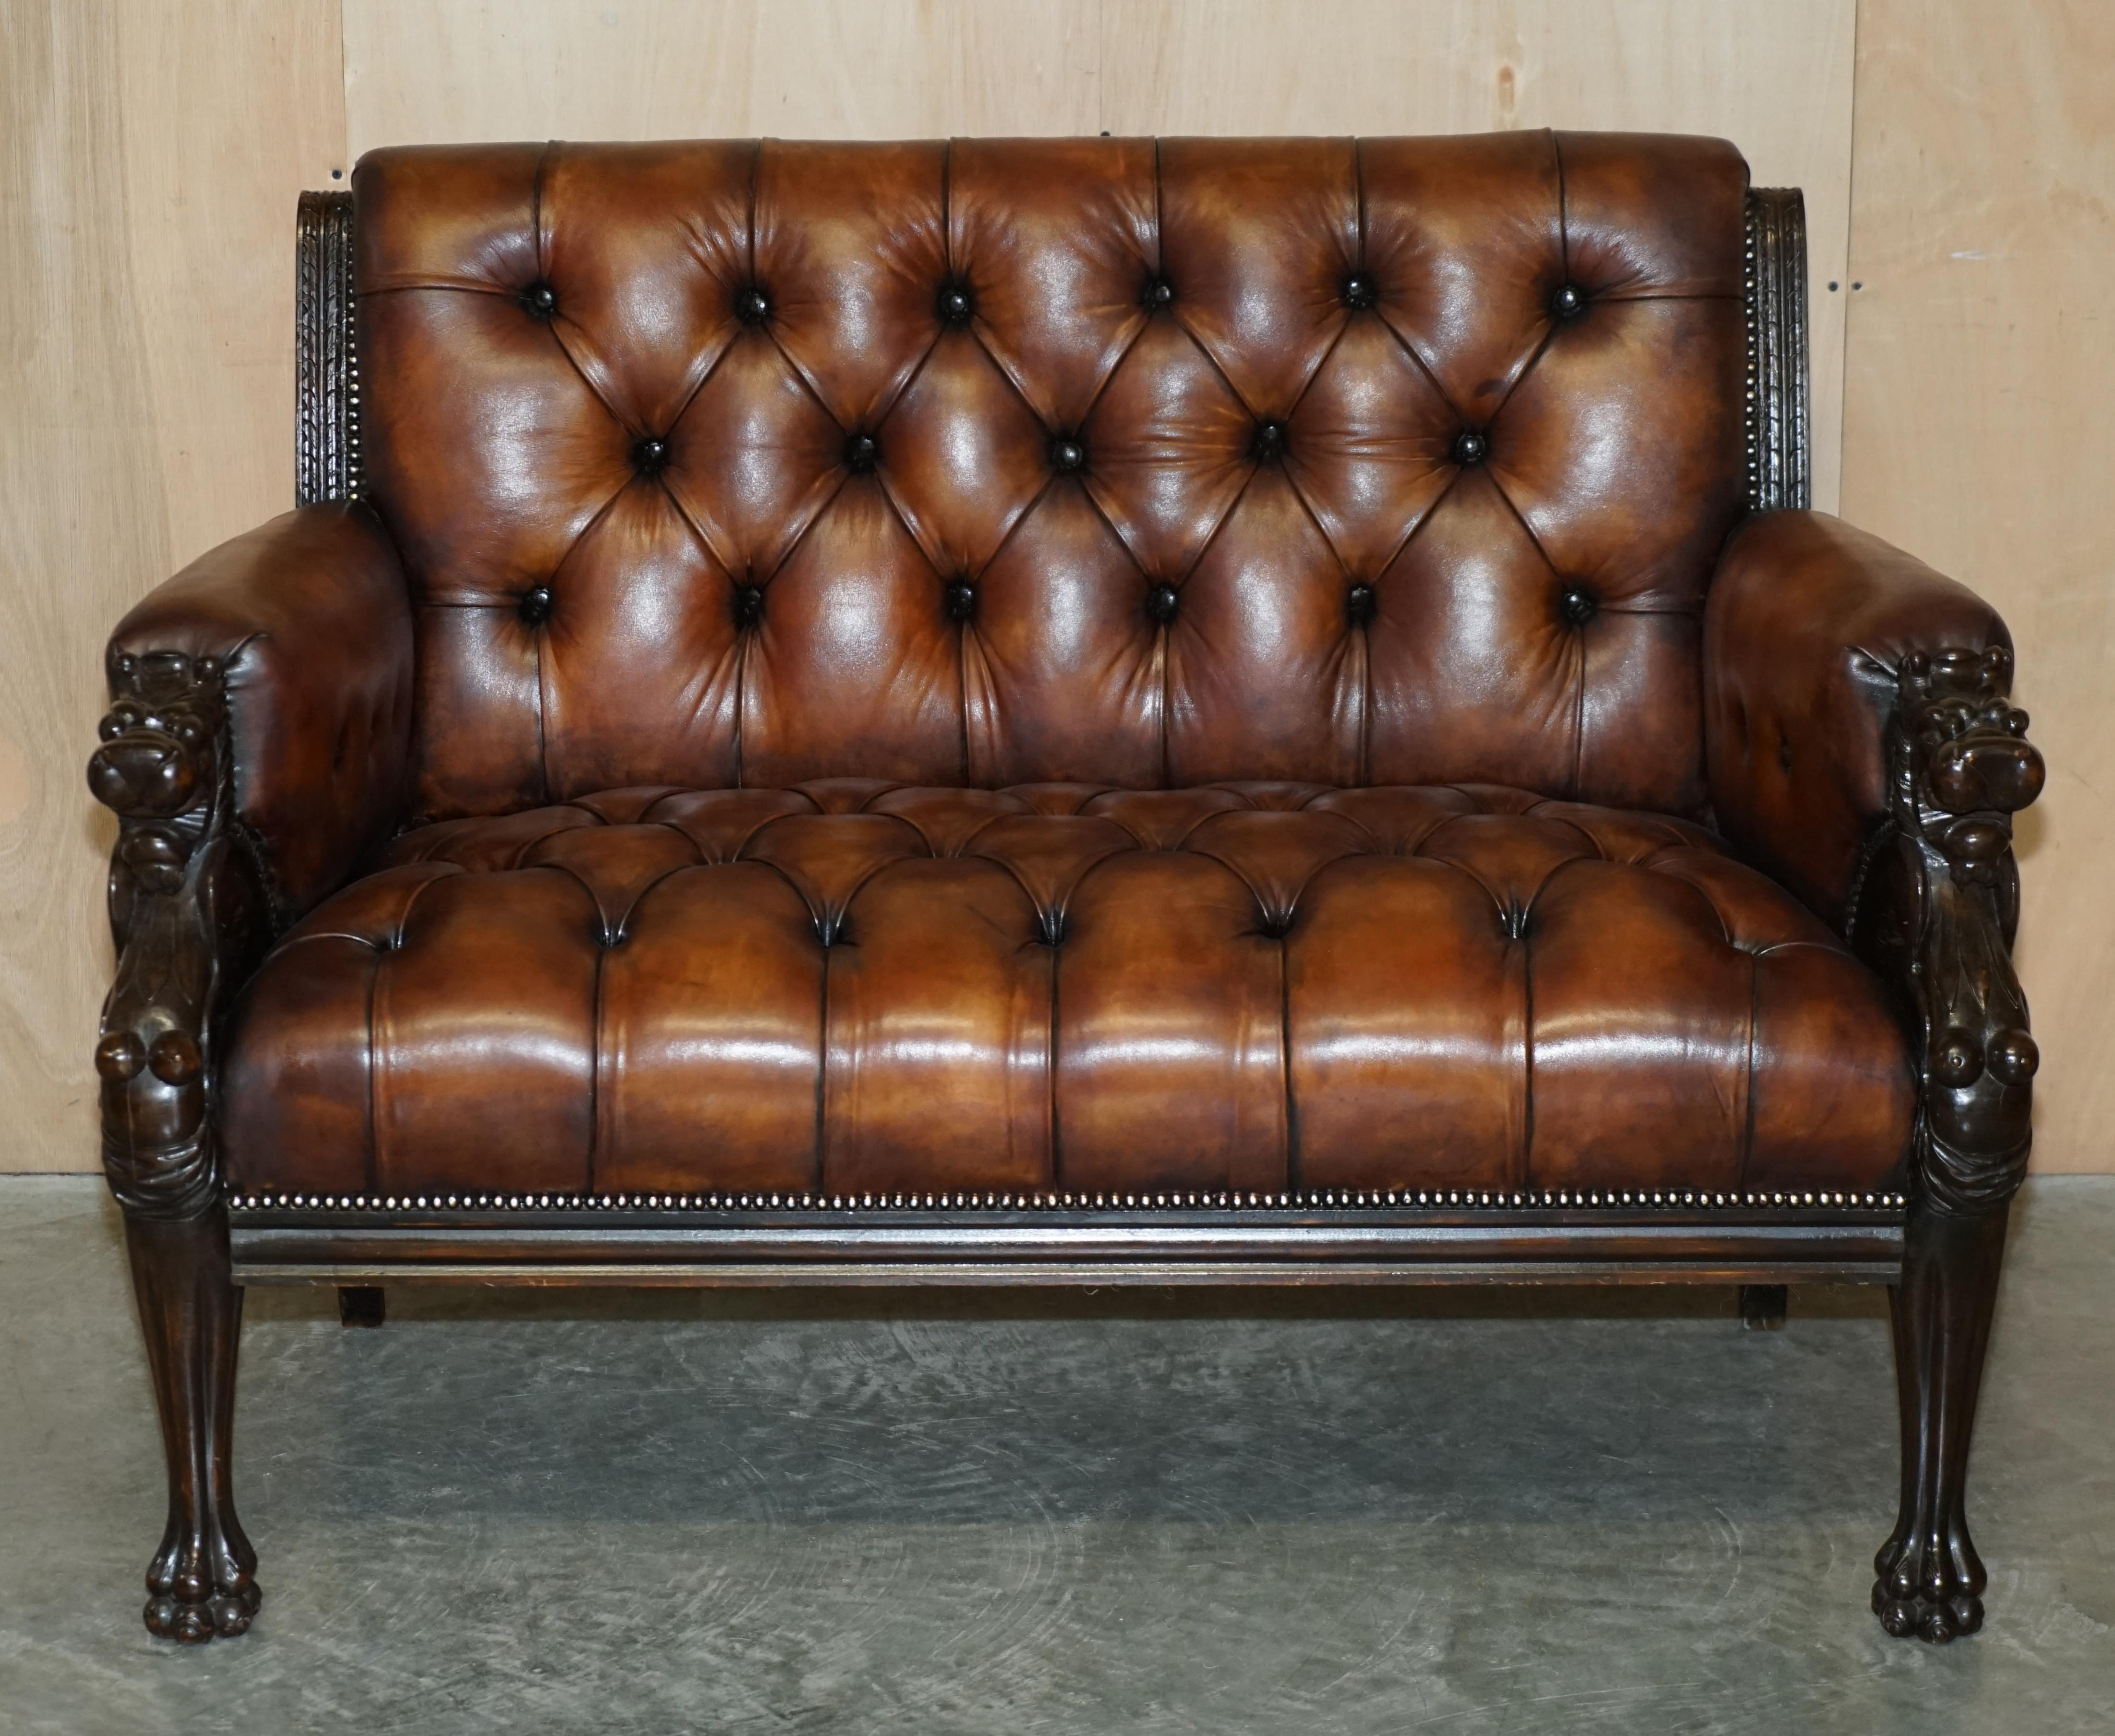 RESTORED ANTIQUE LiON HAND CARVED BROWN LEATHER CHESTERFIELD SOFA ARMCHAIR SUITE (Belgisch) im Angebot